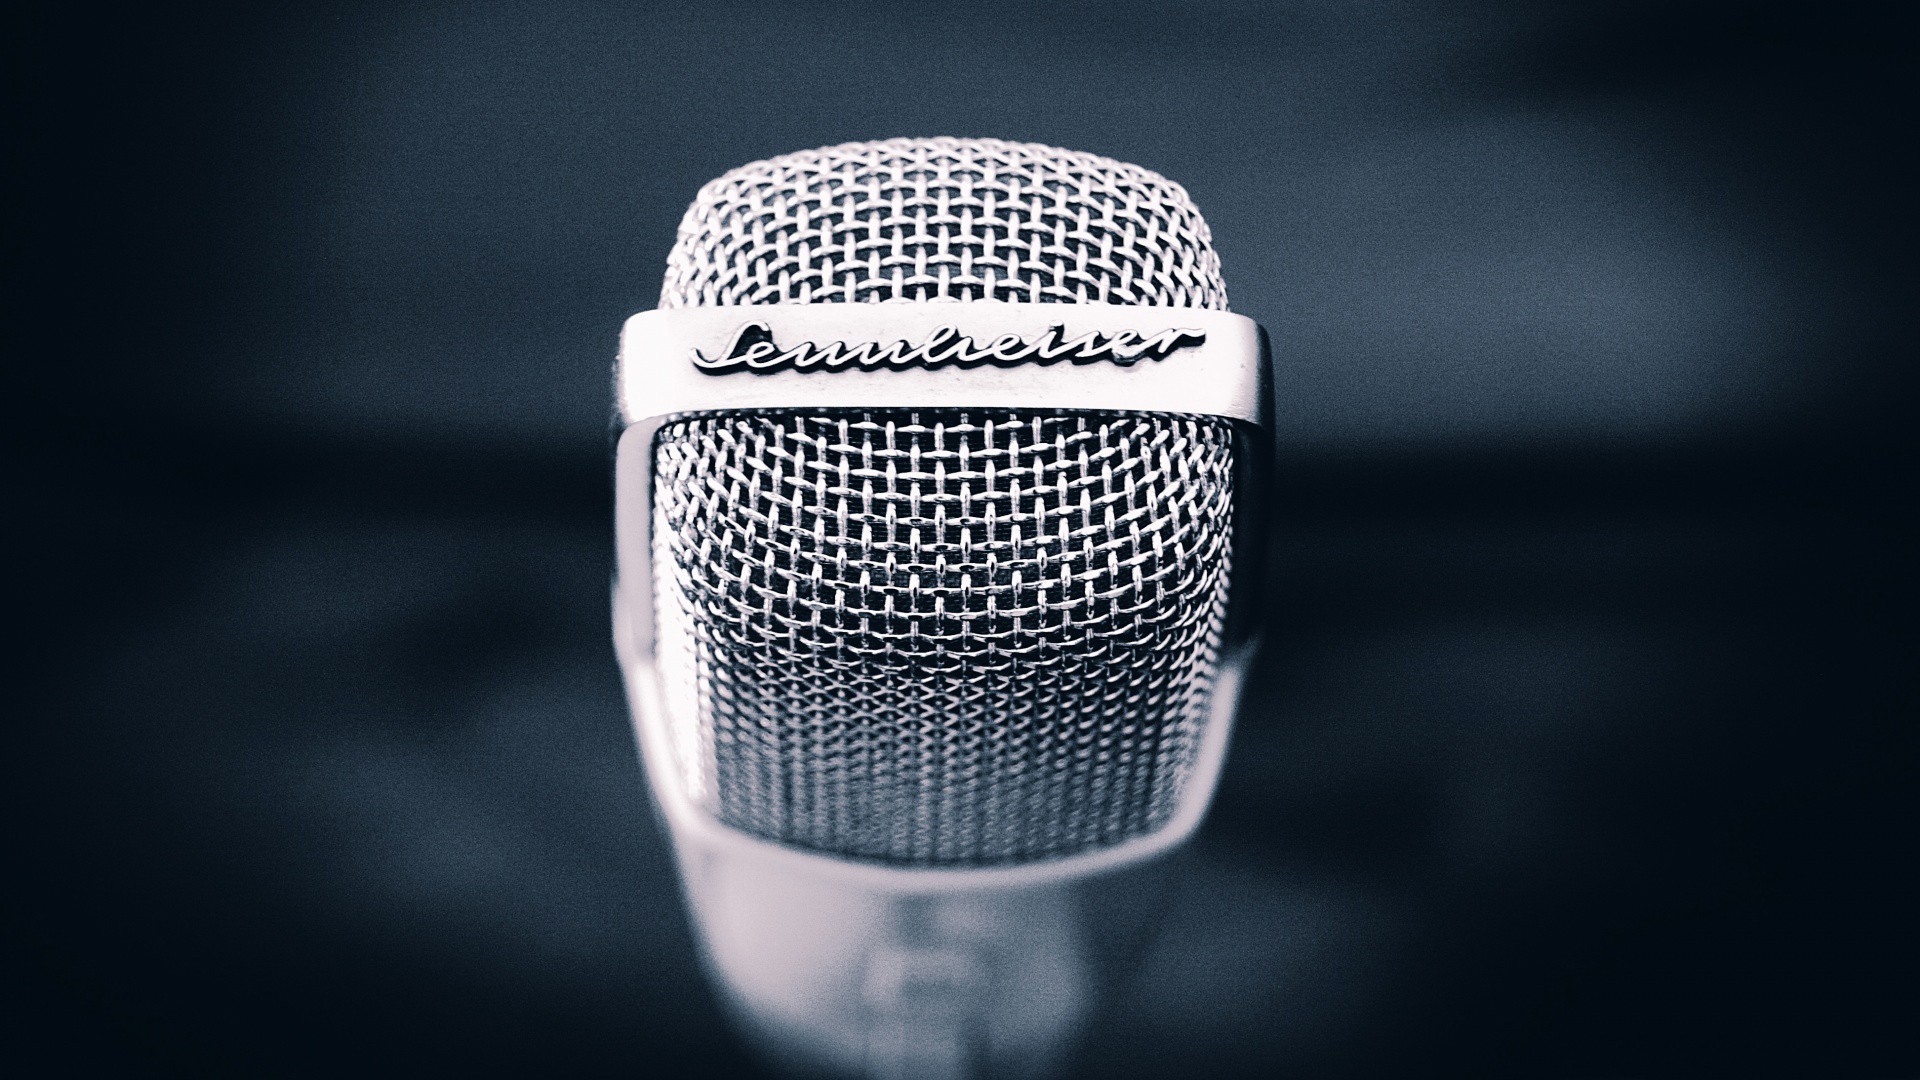 Mic Photos, Download The BEST Free Mic Stock Photos & HD Images